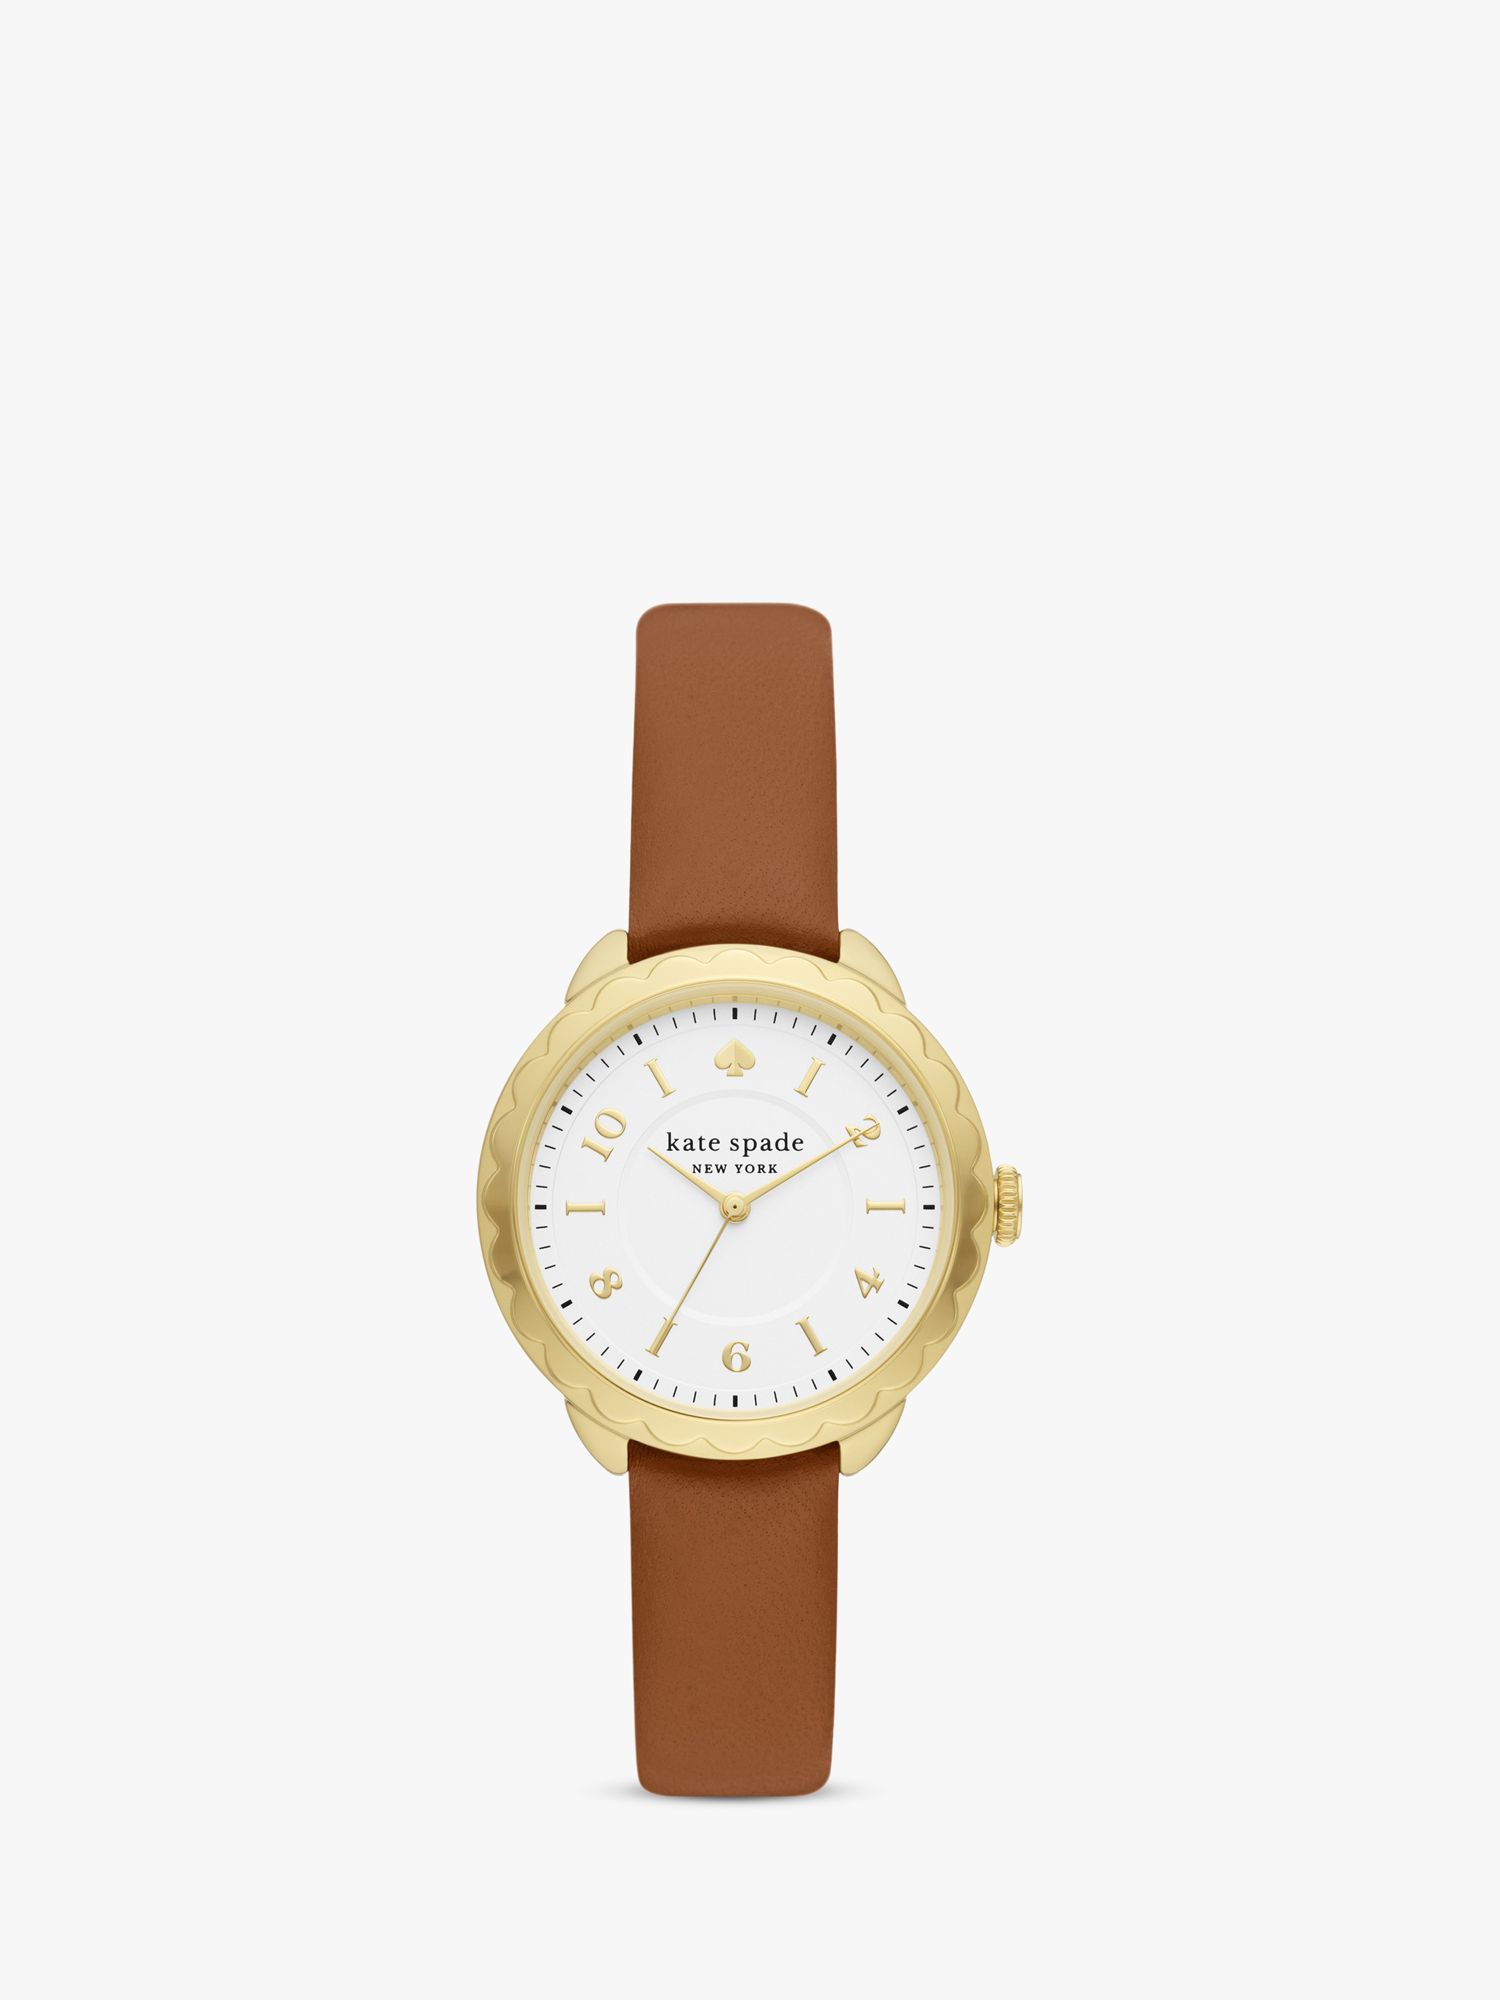 kate spade new york Morningside Leather Strap Watch, Gold KSW1756 at John  Lewis & Partners